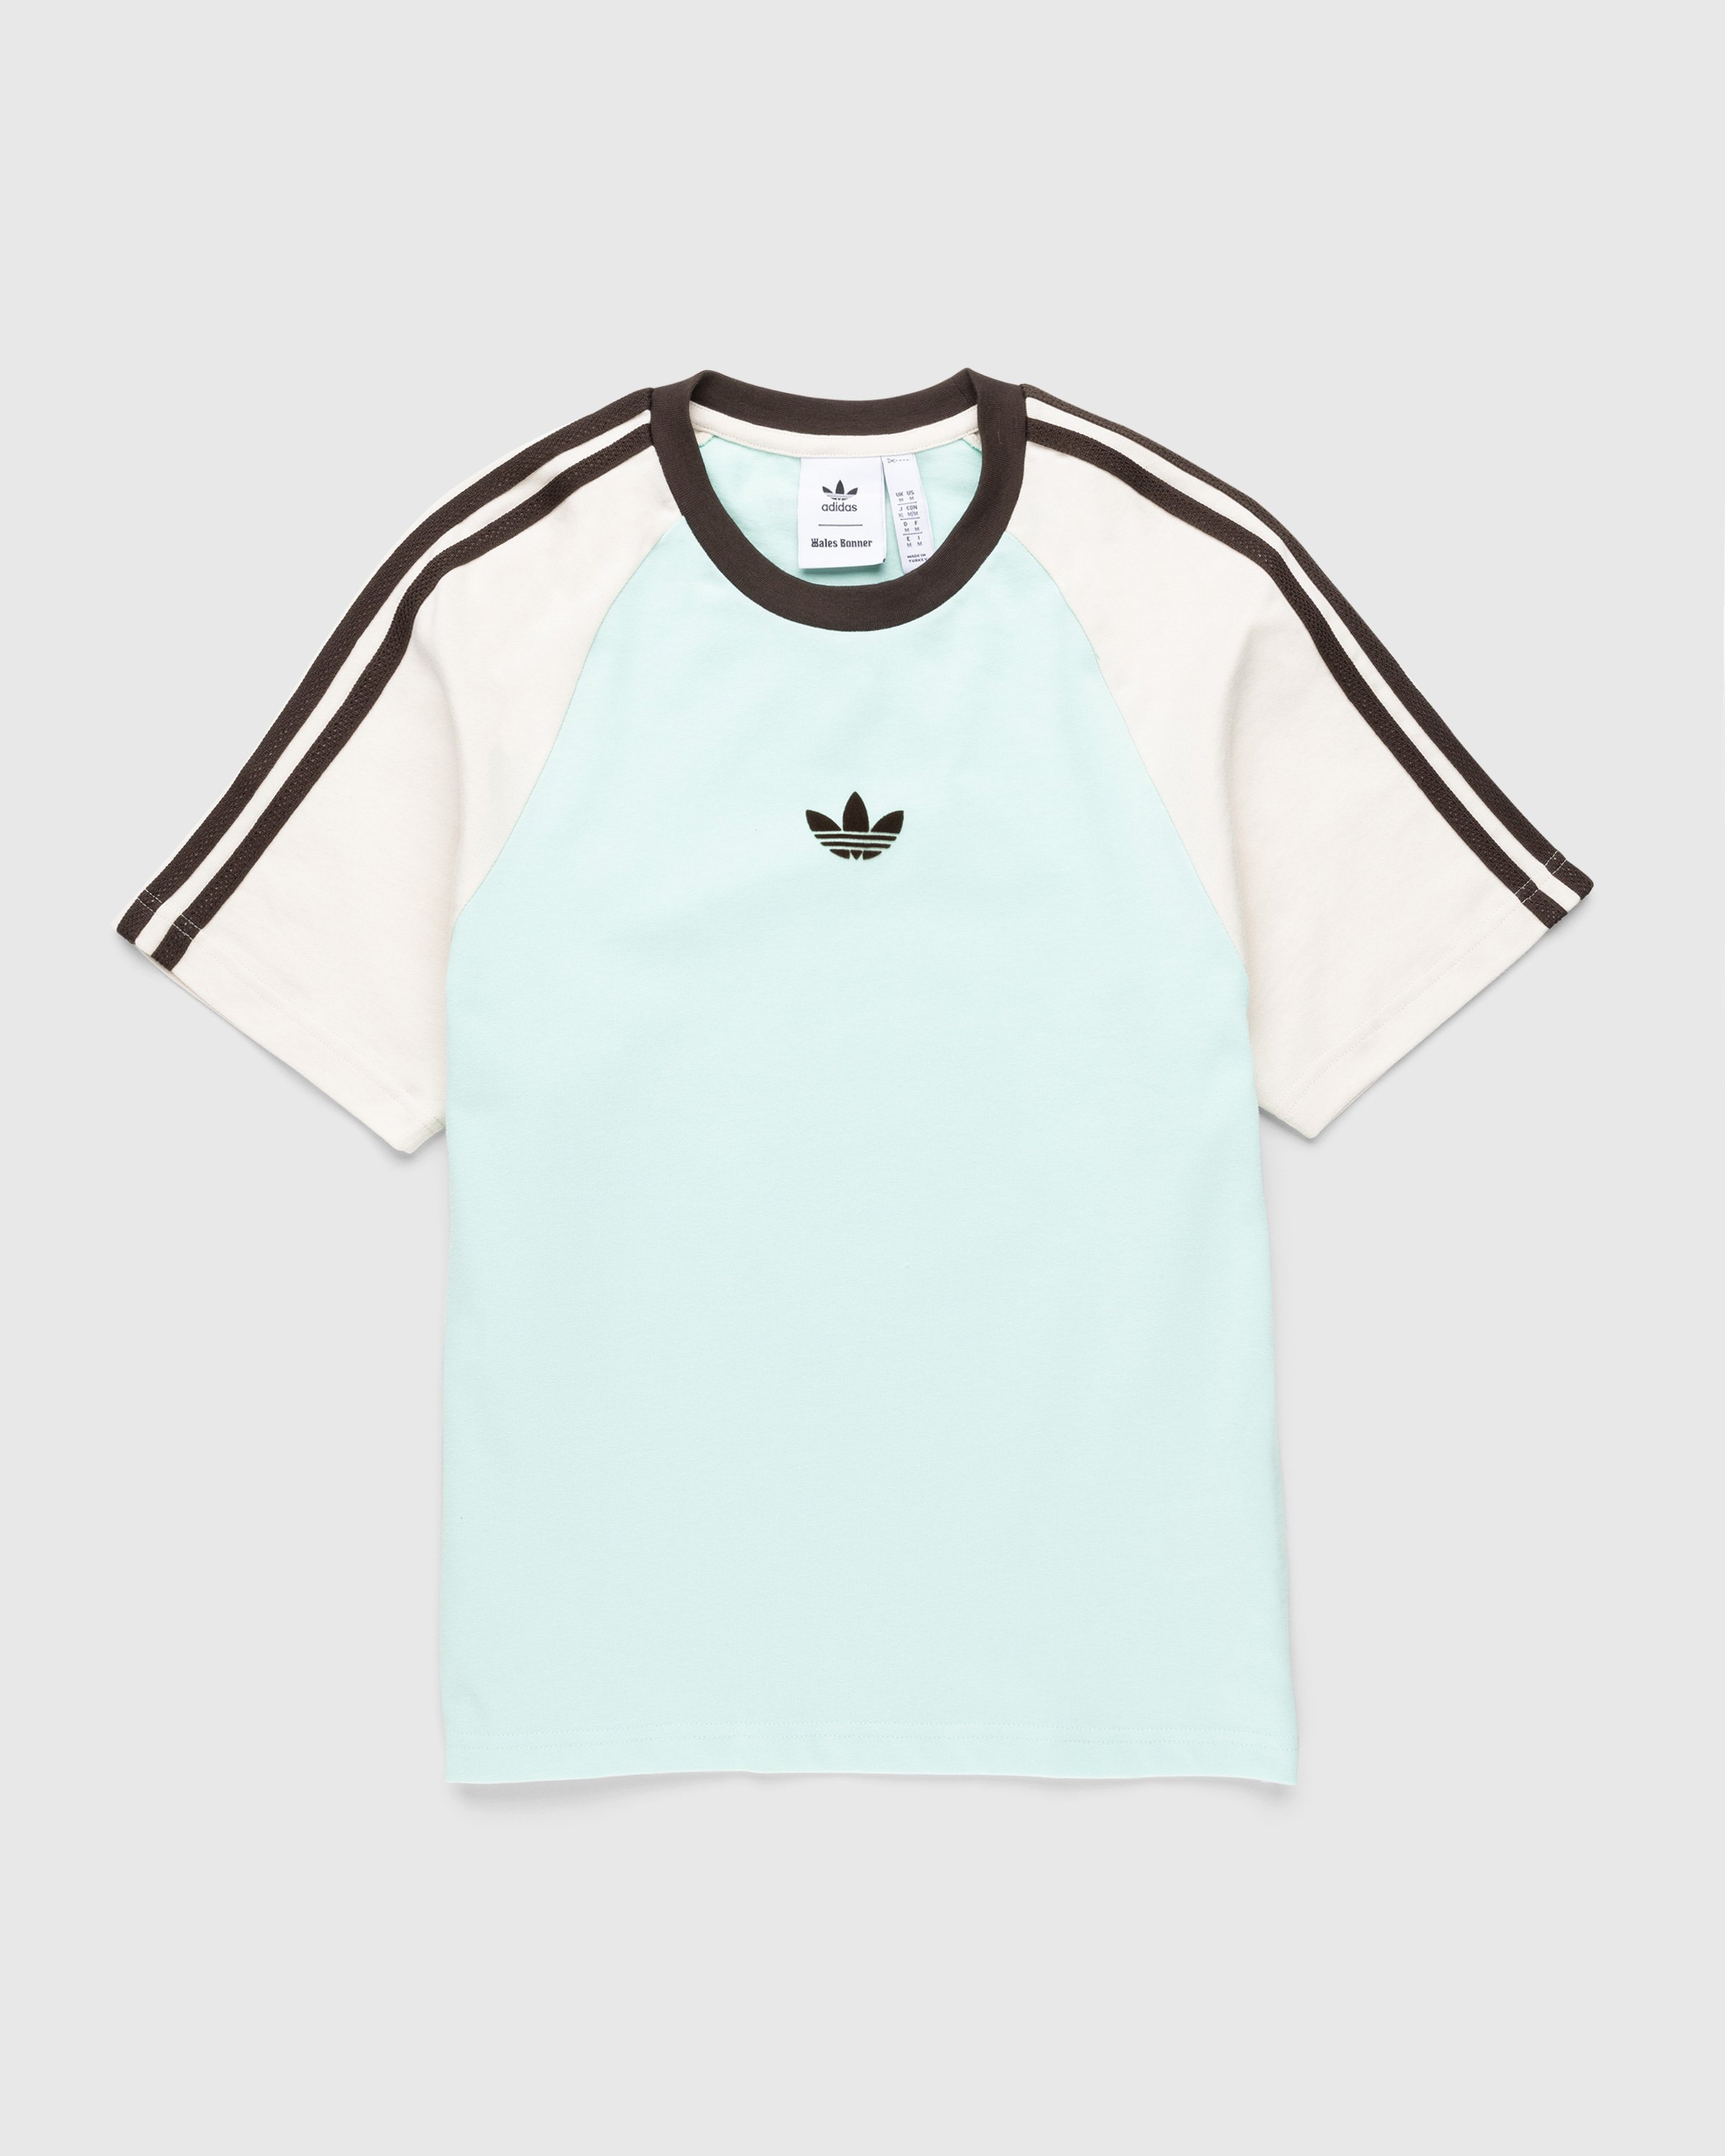 Adidas x Wales Bonner - Organic Cotton Tee Clear Mint - Clothing - Green - Image 1